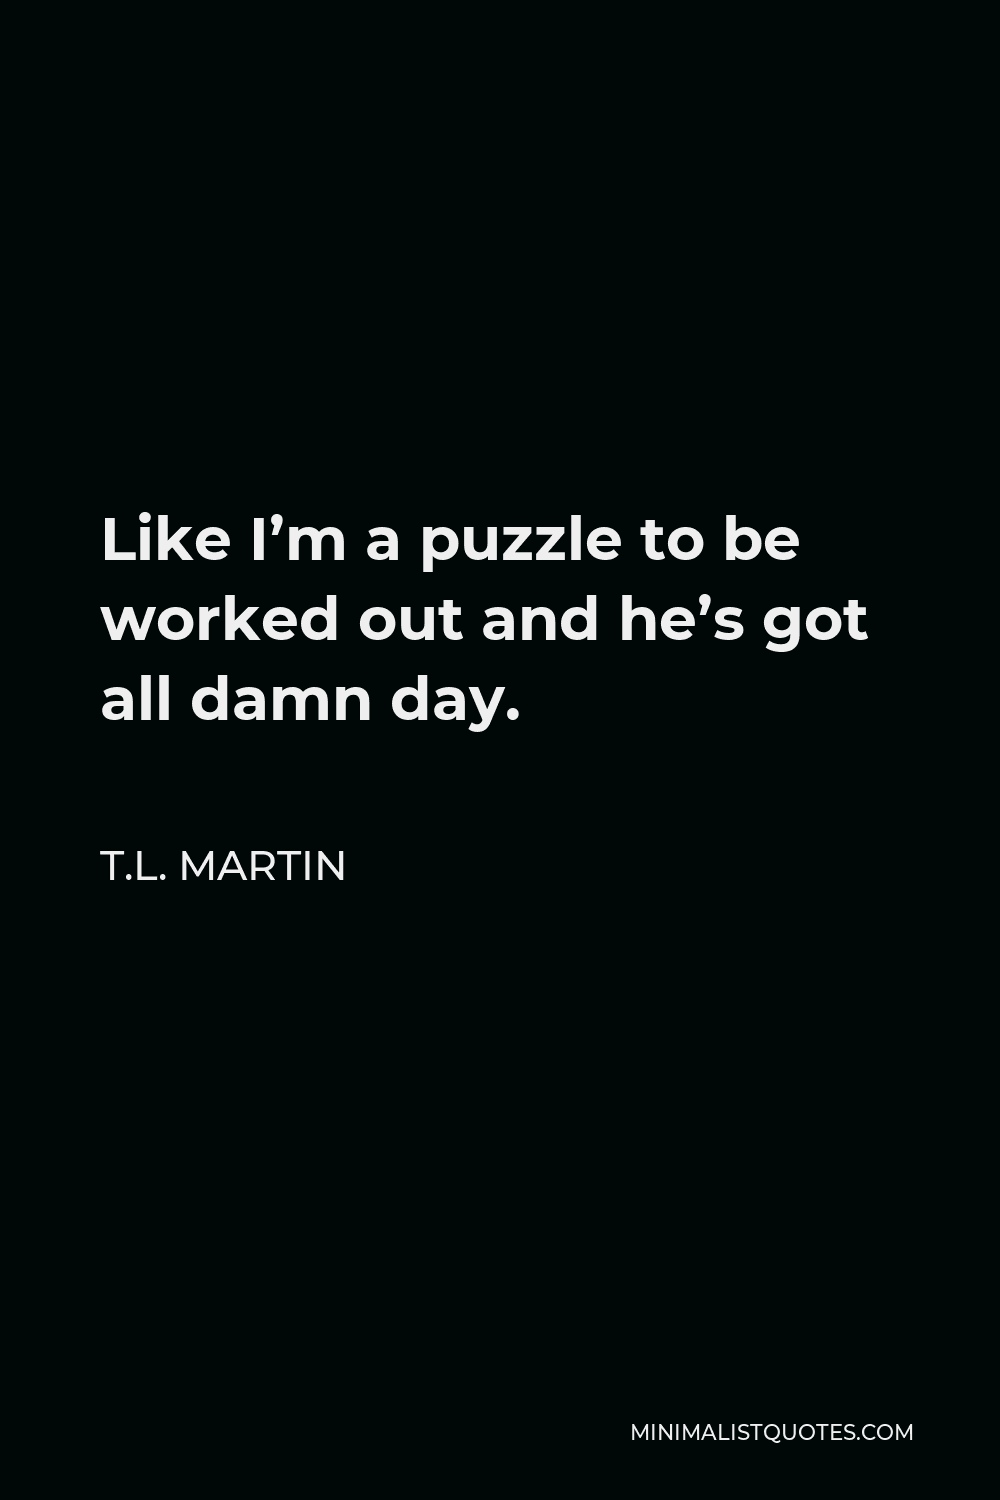 T.L. Martin Quote - Like I’m a puzzle to be worked out and he’s got all damn day.